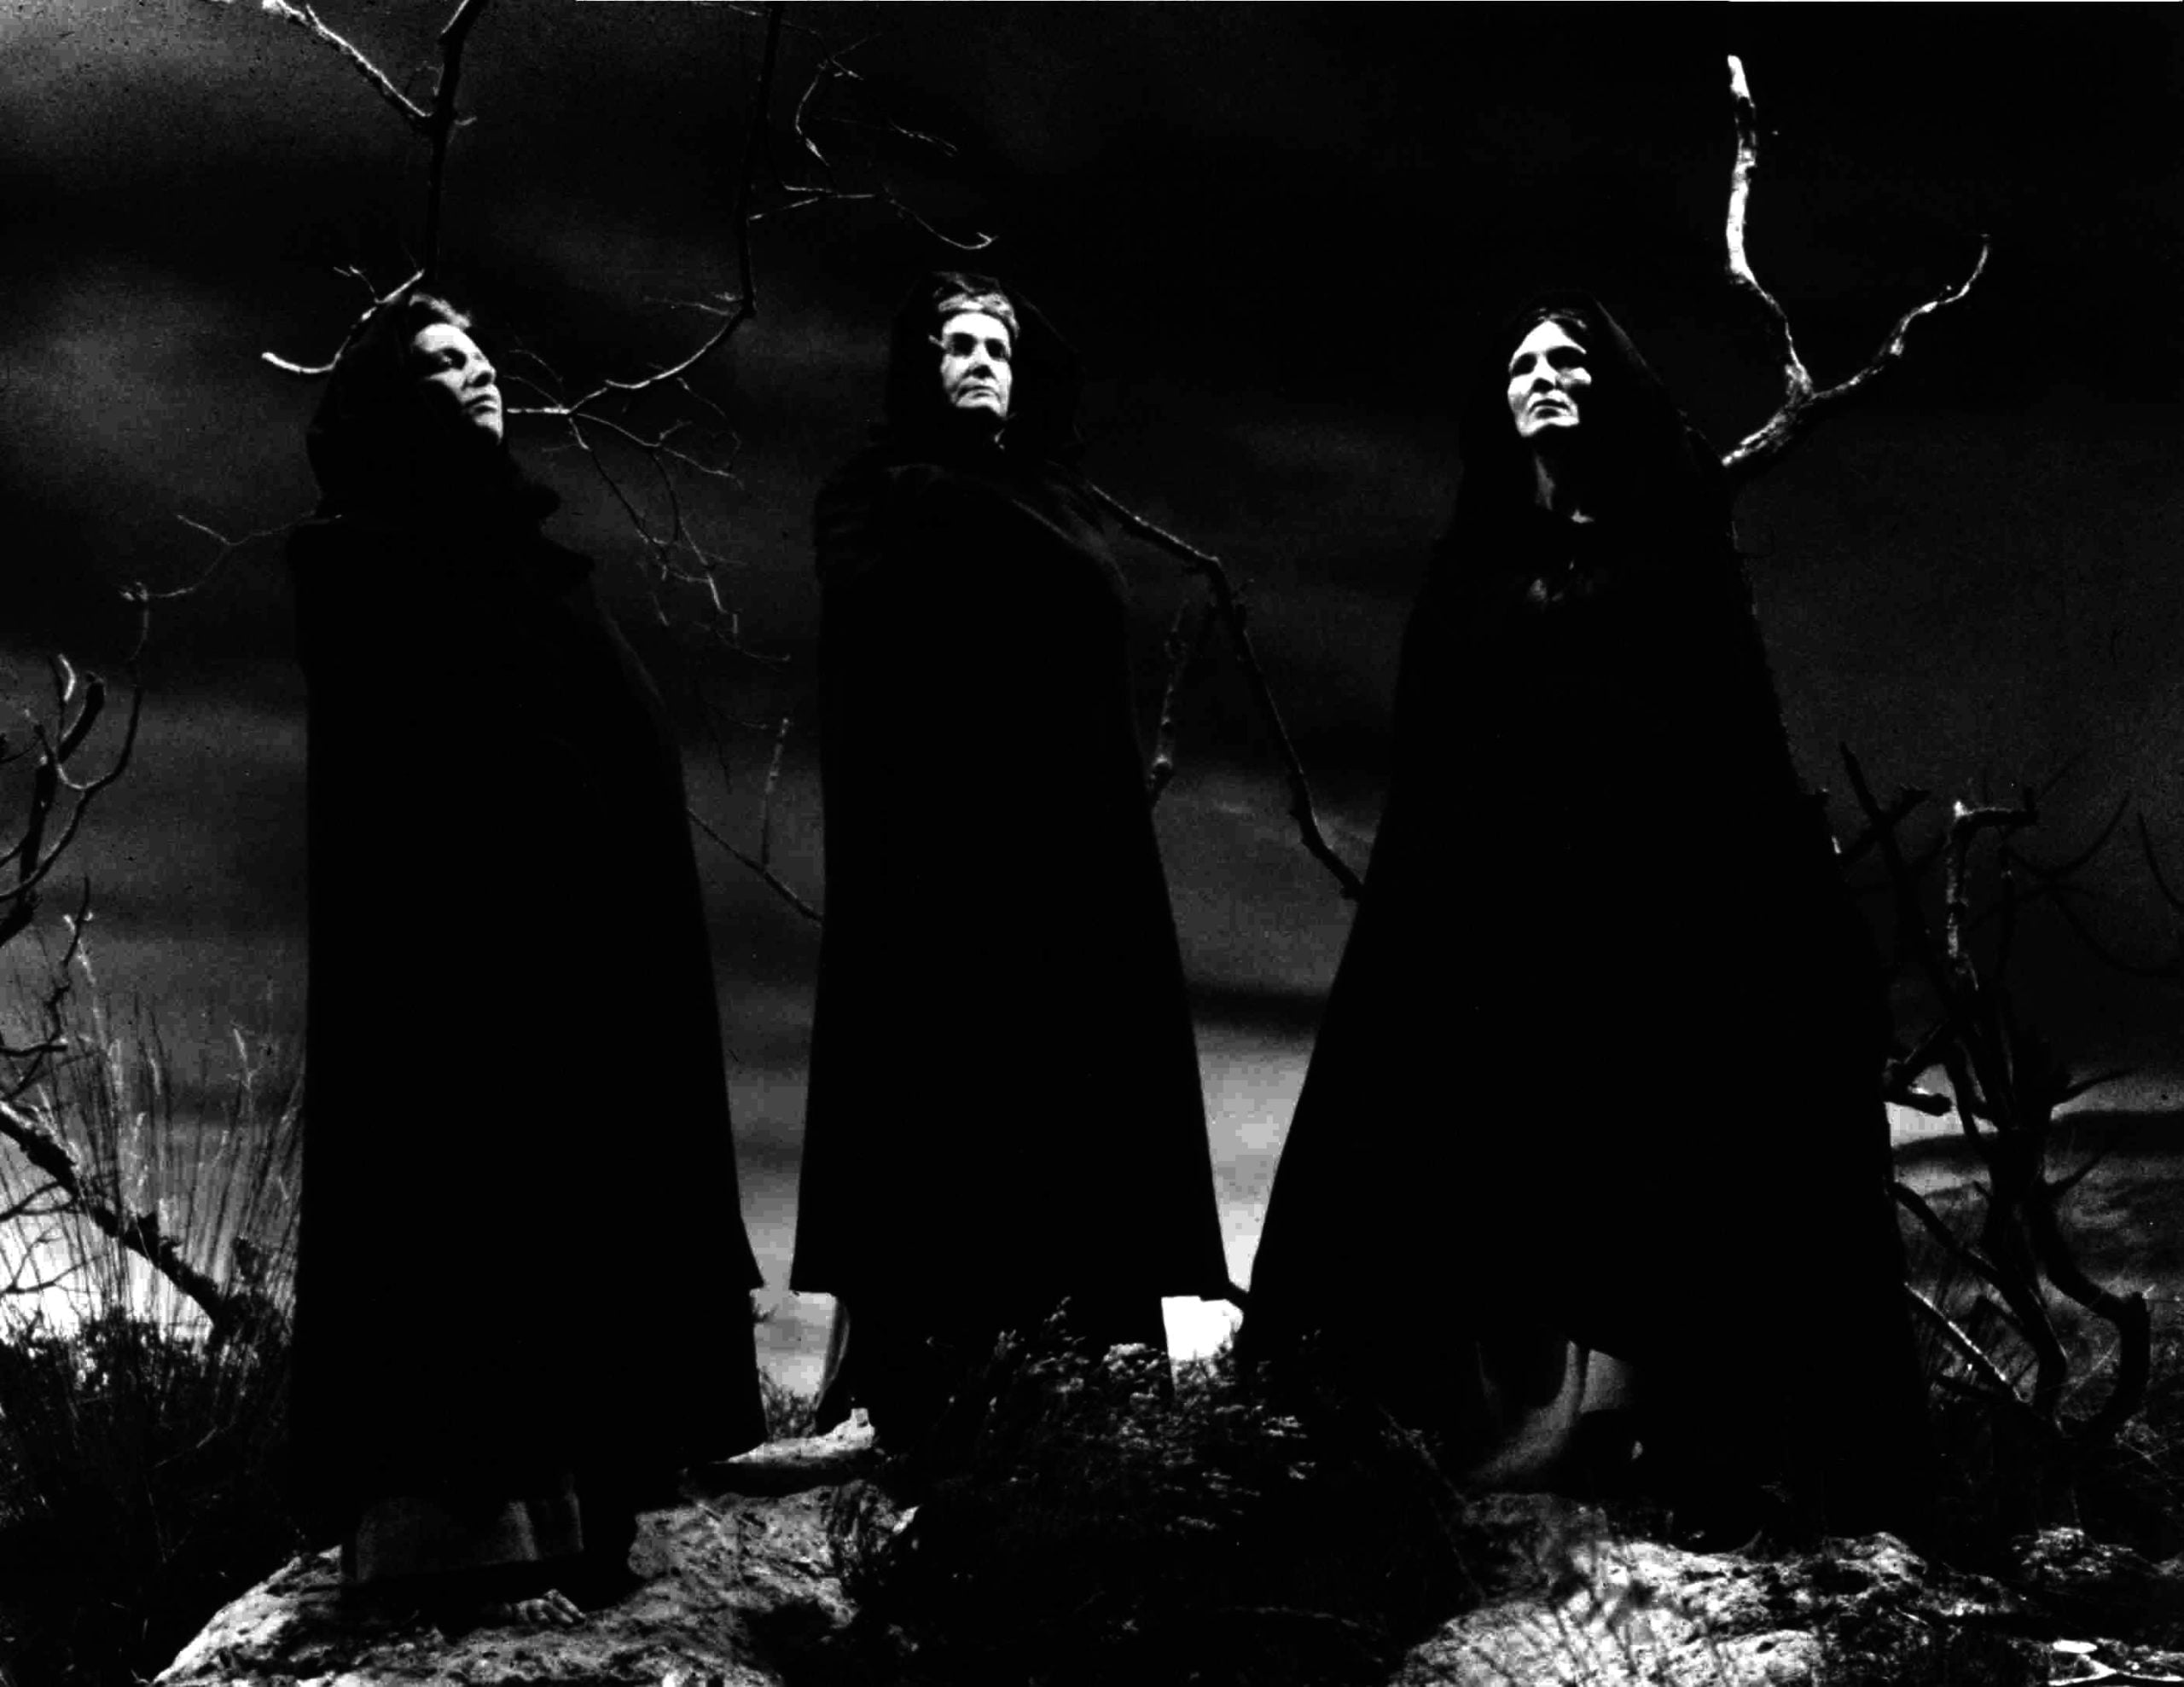 Macbeth’s Three Witches: Three of a Kind While we’re talking about iconic w...